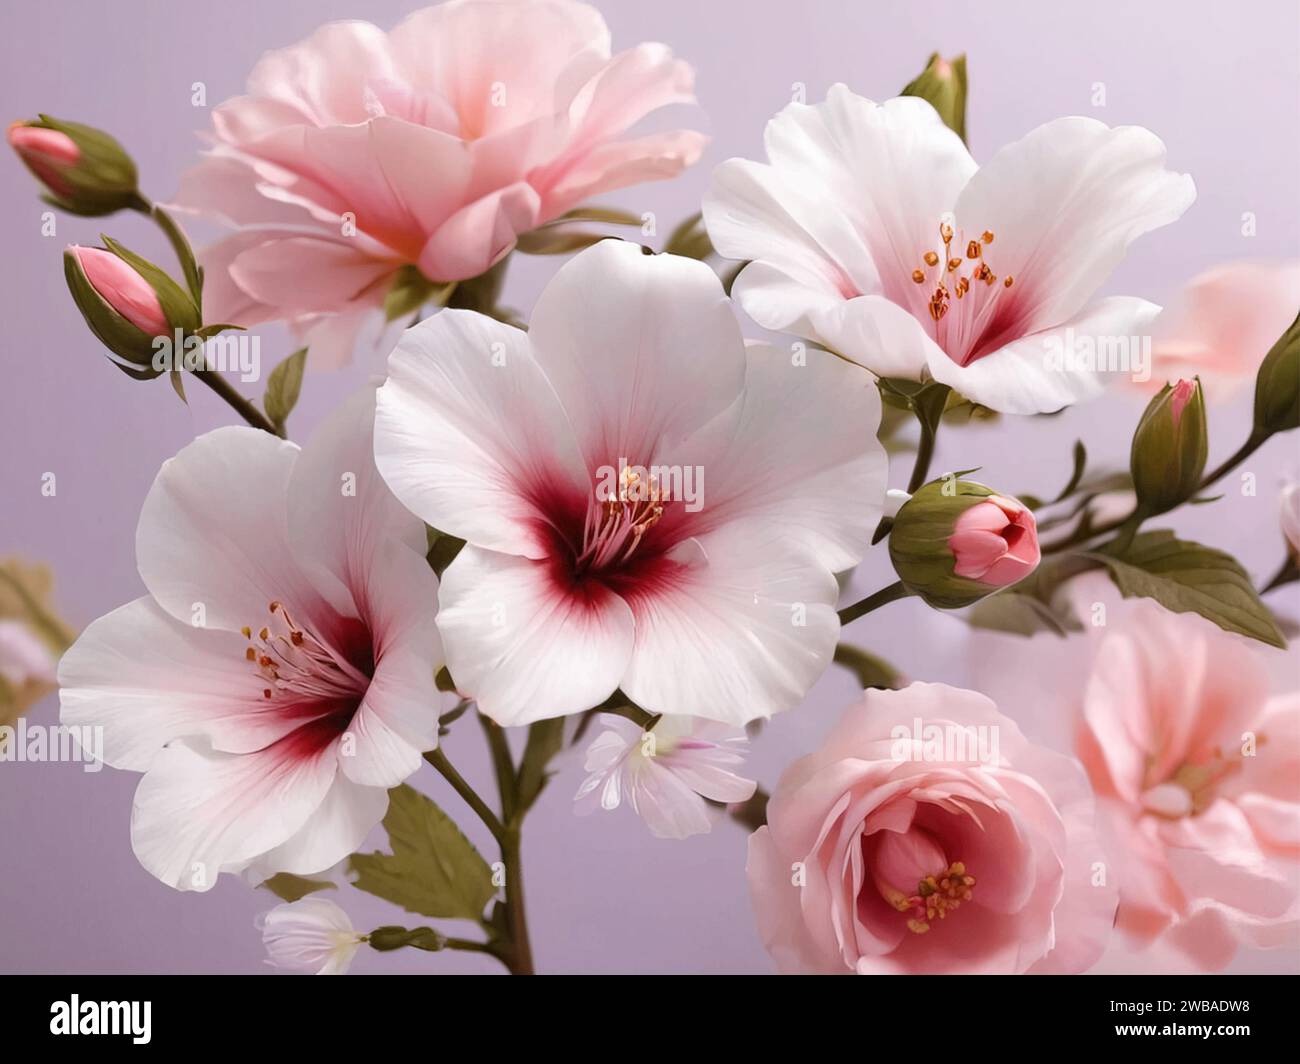 Blooming beauty at its finest! These vibrant and stunning flowers are a true testament to the wonders of nature. Enjoying the little things in life. Stock Vector